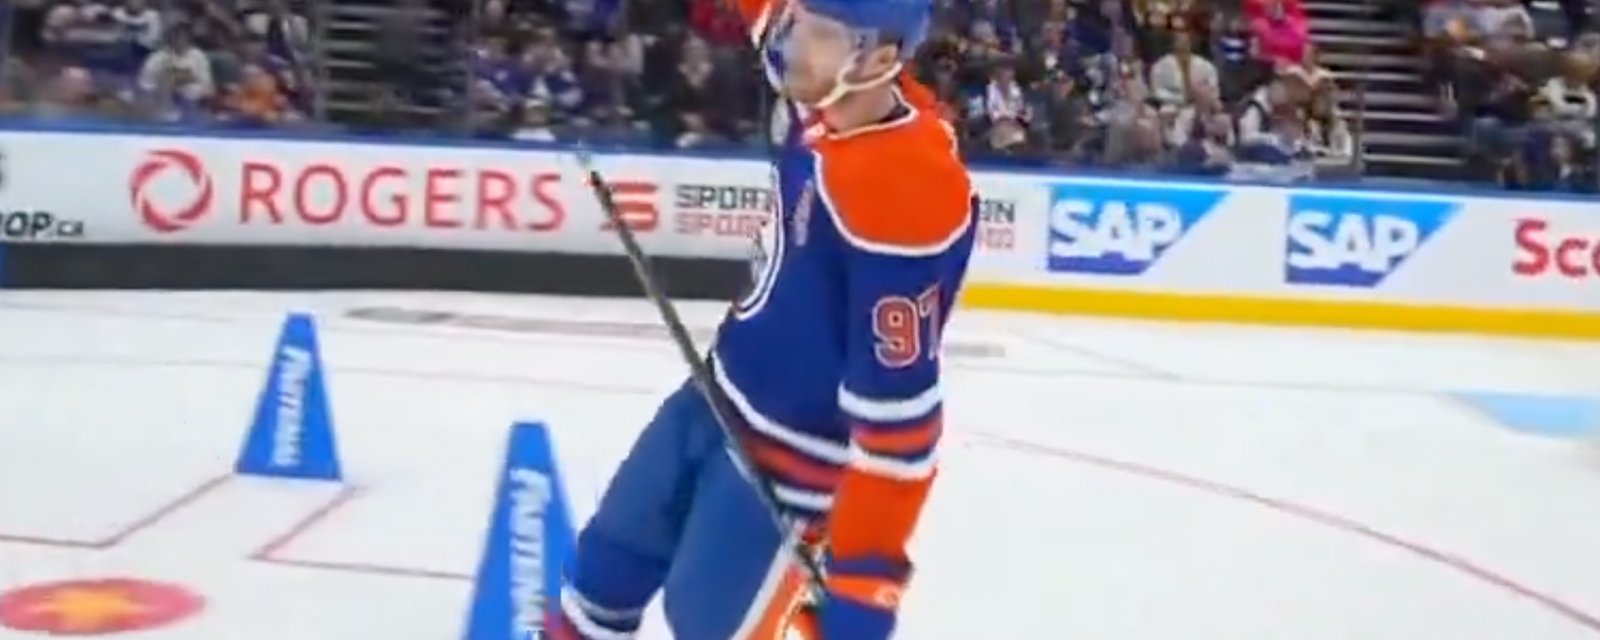 Connor McDavid wins the All-Star Skills competition filled with video review and controversy! 